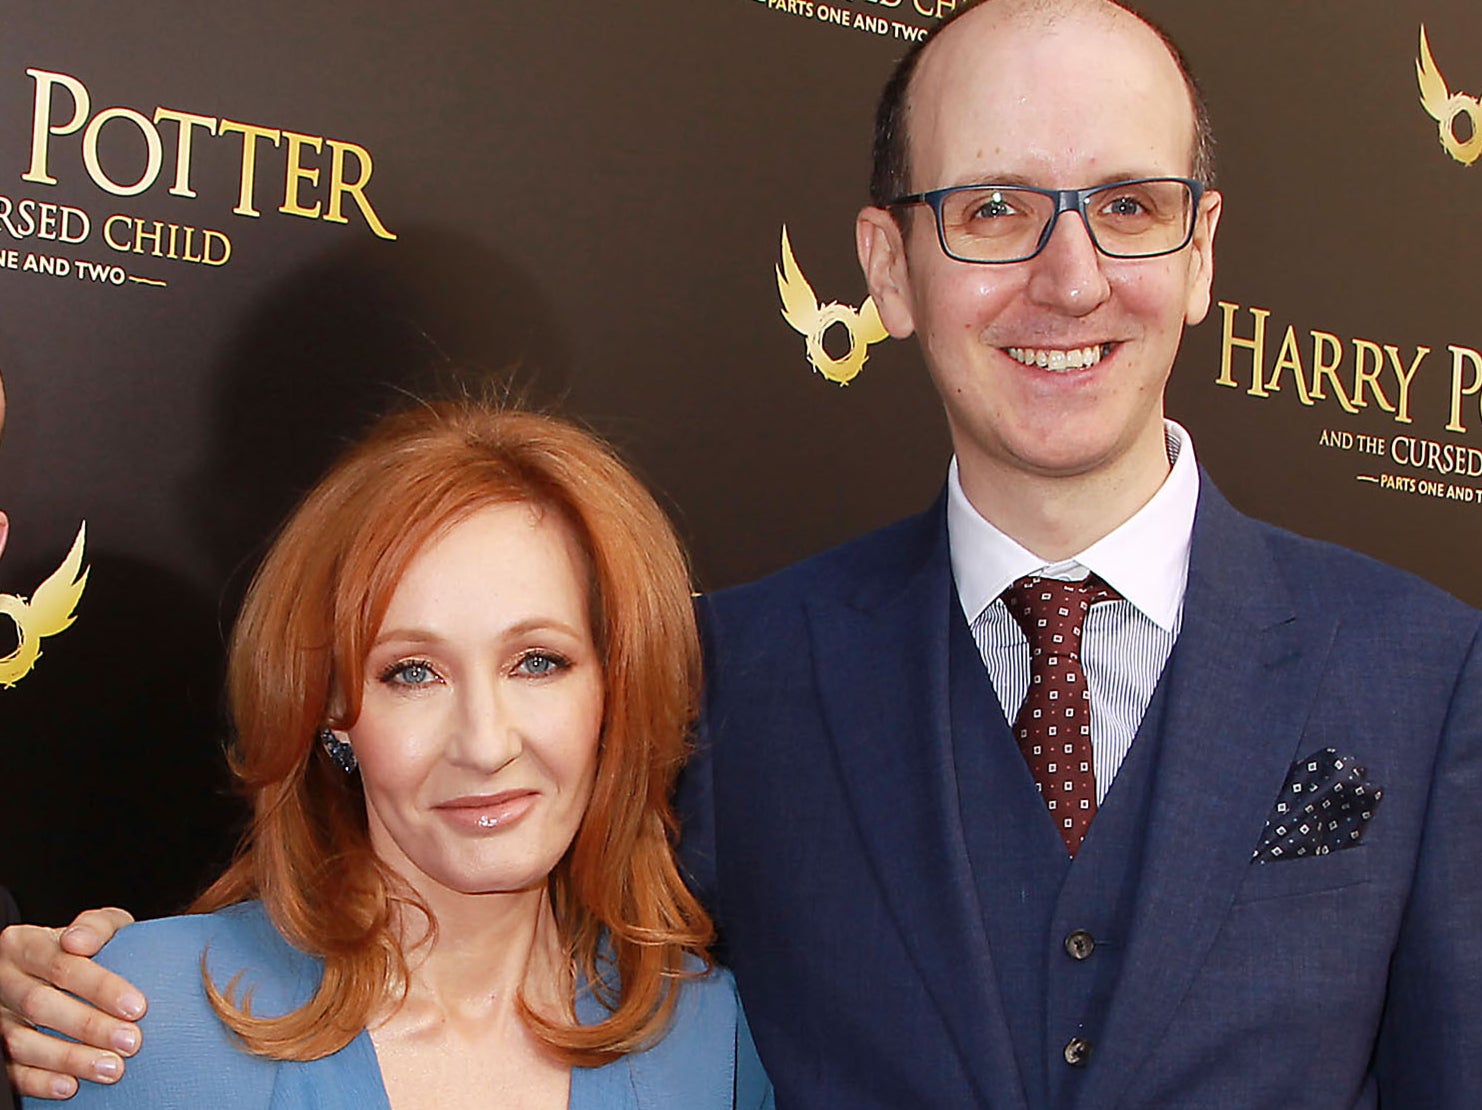 JK Rowling and Jack Thorne at the ‘Harry Potter and the Cursed Child’ opening in New York in 2018